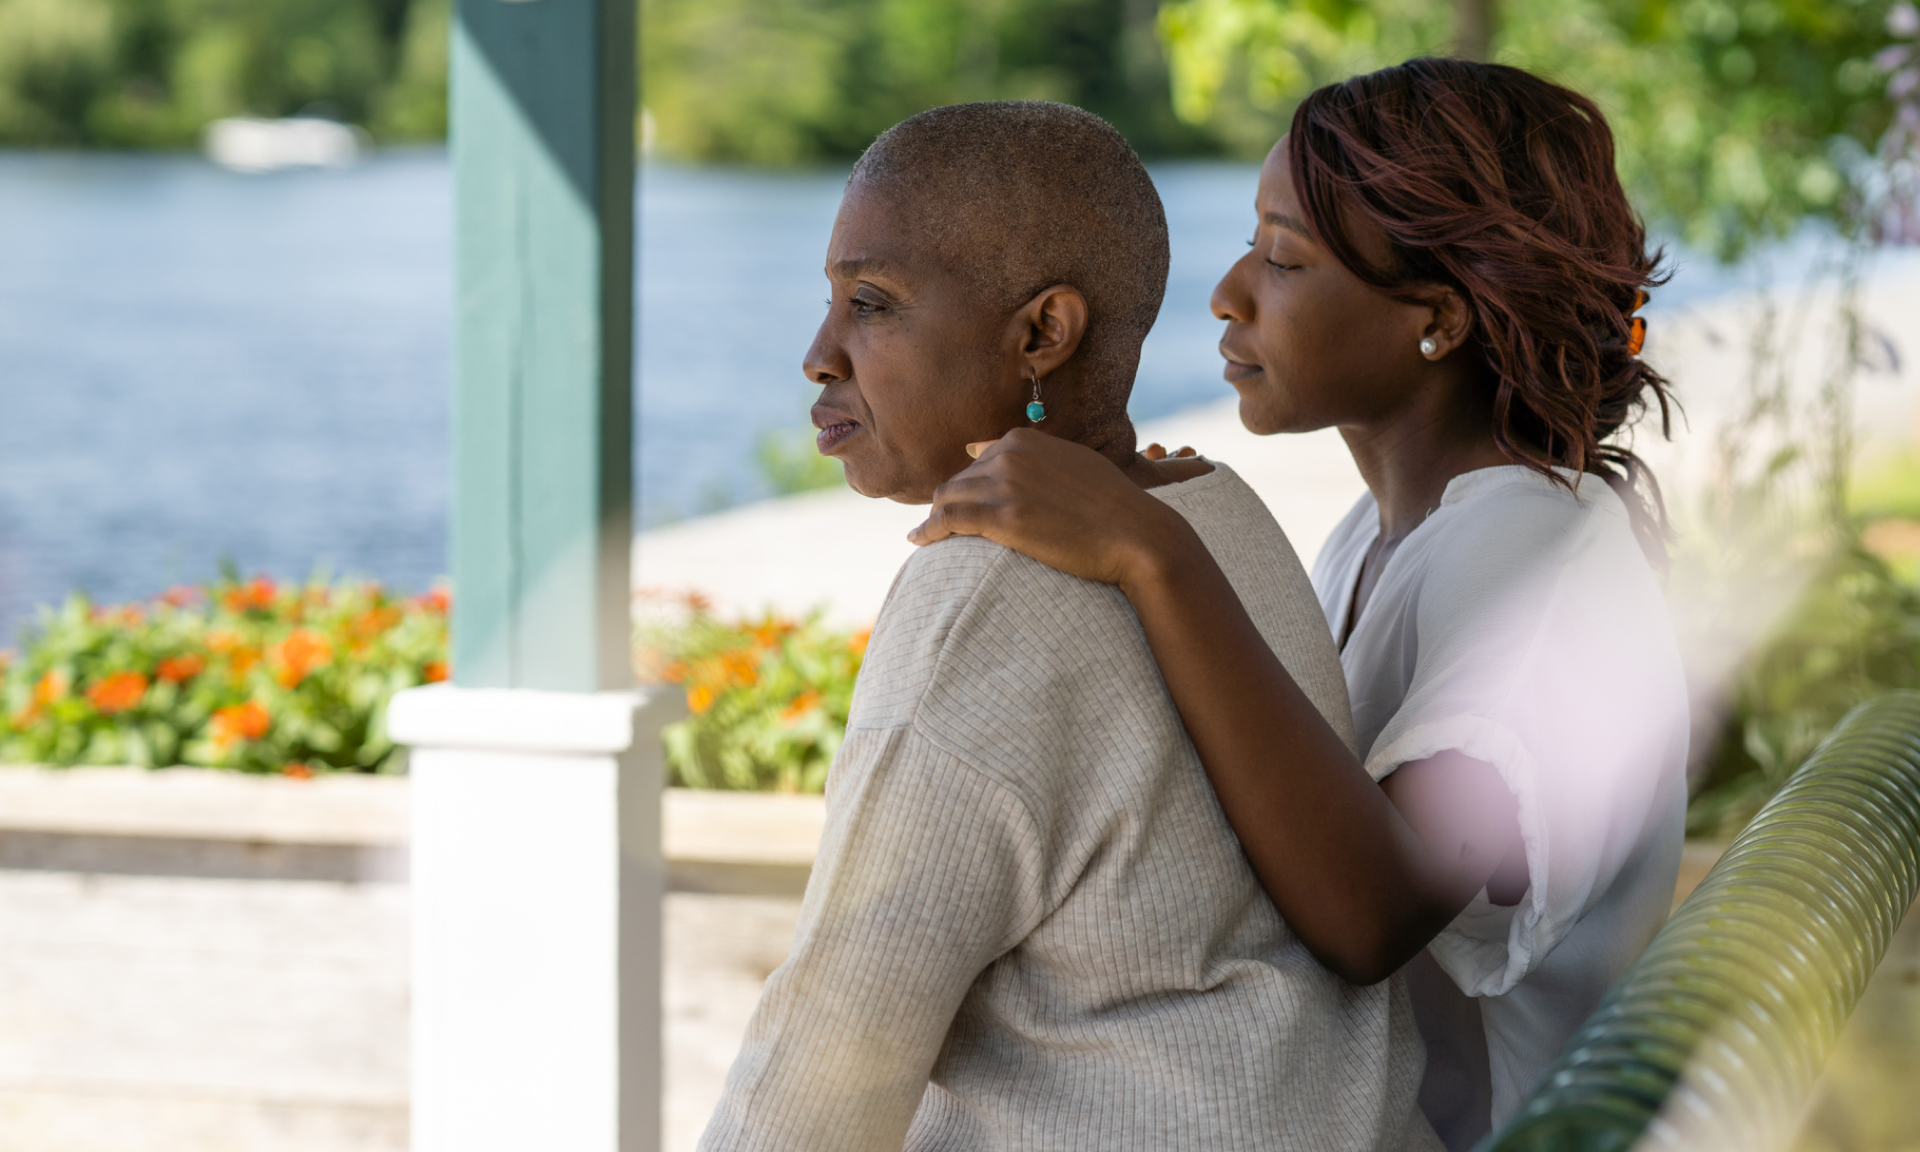 A young Black woman and an older Black woman sit on a bench in a park together